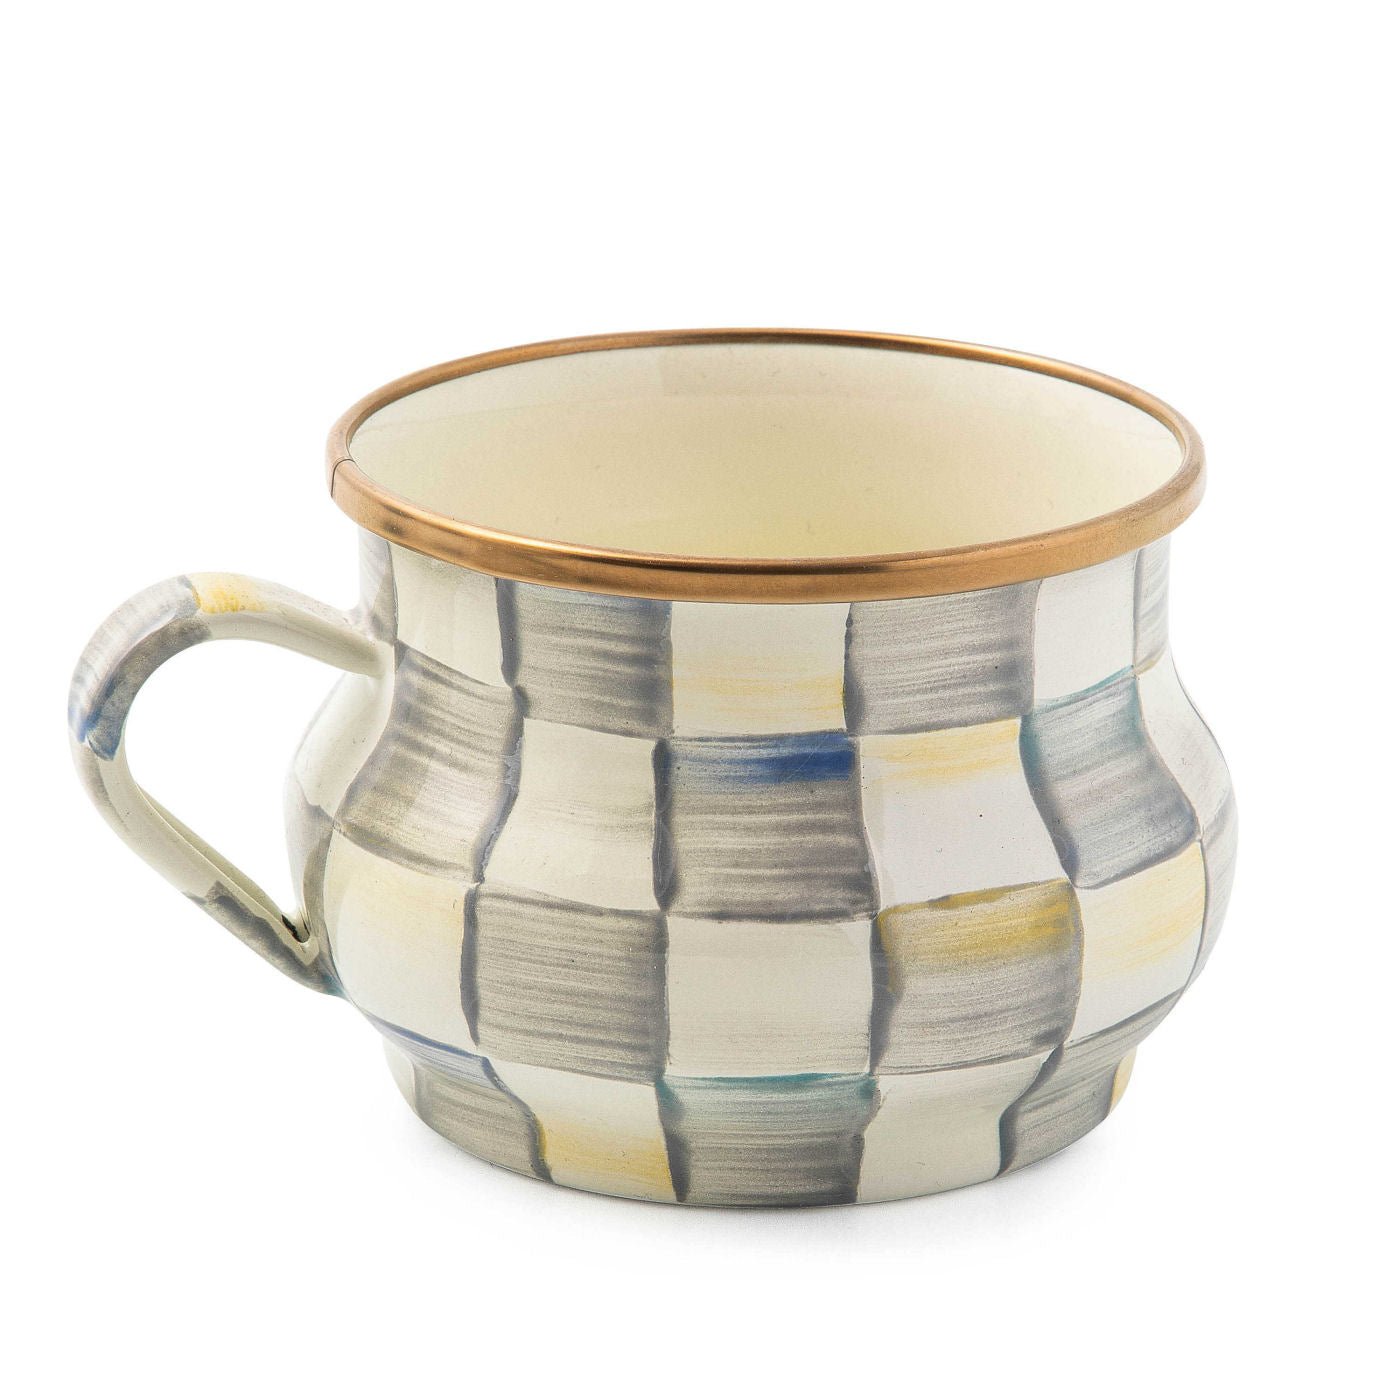 MacKenzie-Childs Sterling Check Teacup - |VESIMI Design| Luxury Bathrooms and Home Decor